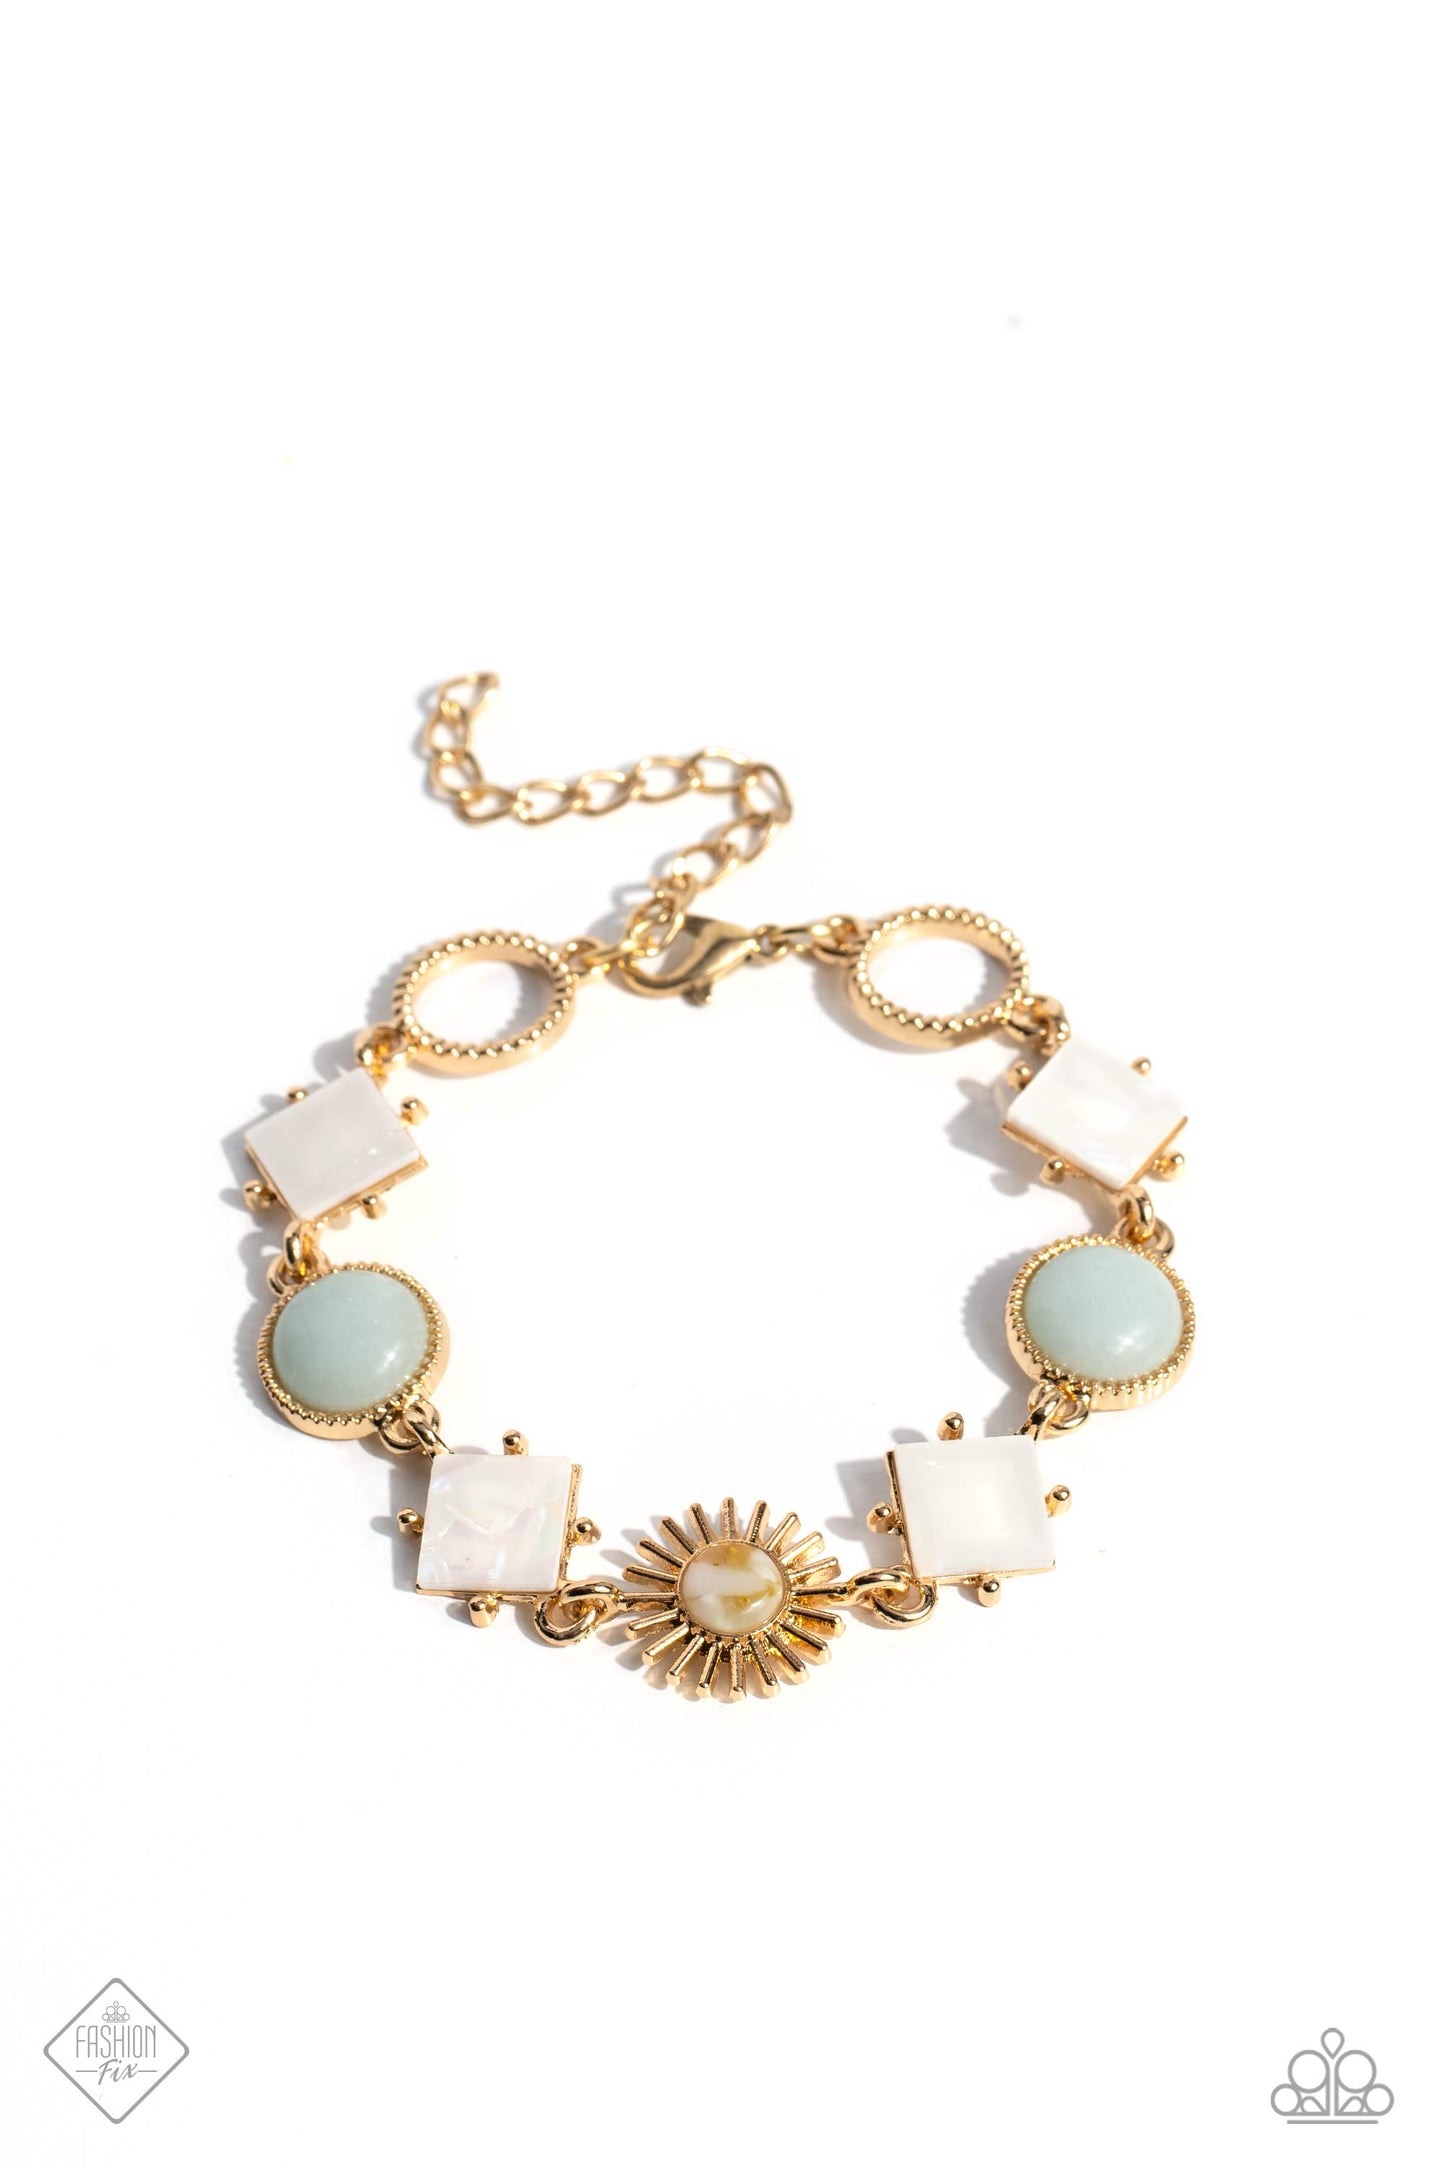 Sunburst Splendor - Gold Bracelet - Paparazzi Accessories - White shells tilted on point, muted blue stones, textured gold circles, and radiating gold sunbursts with multicolored stone centers link around the wrist, creating an earthy display. Each element is wrapped in a gold fitting, magnifying the warm sheen of the design.